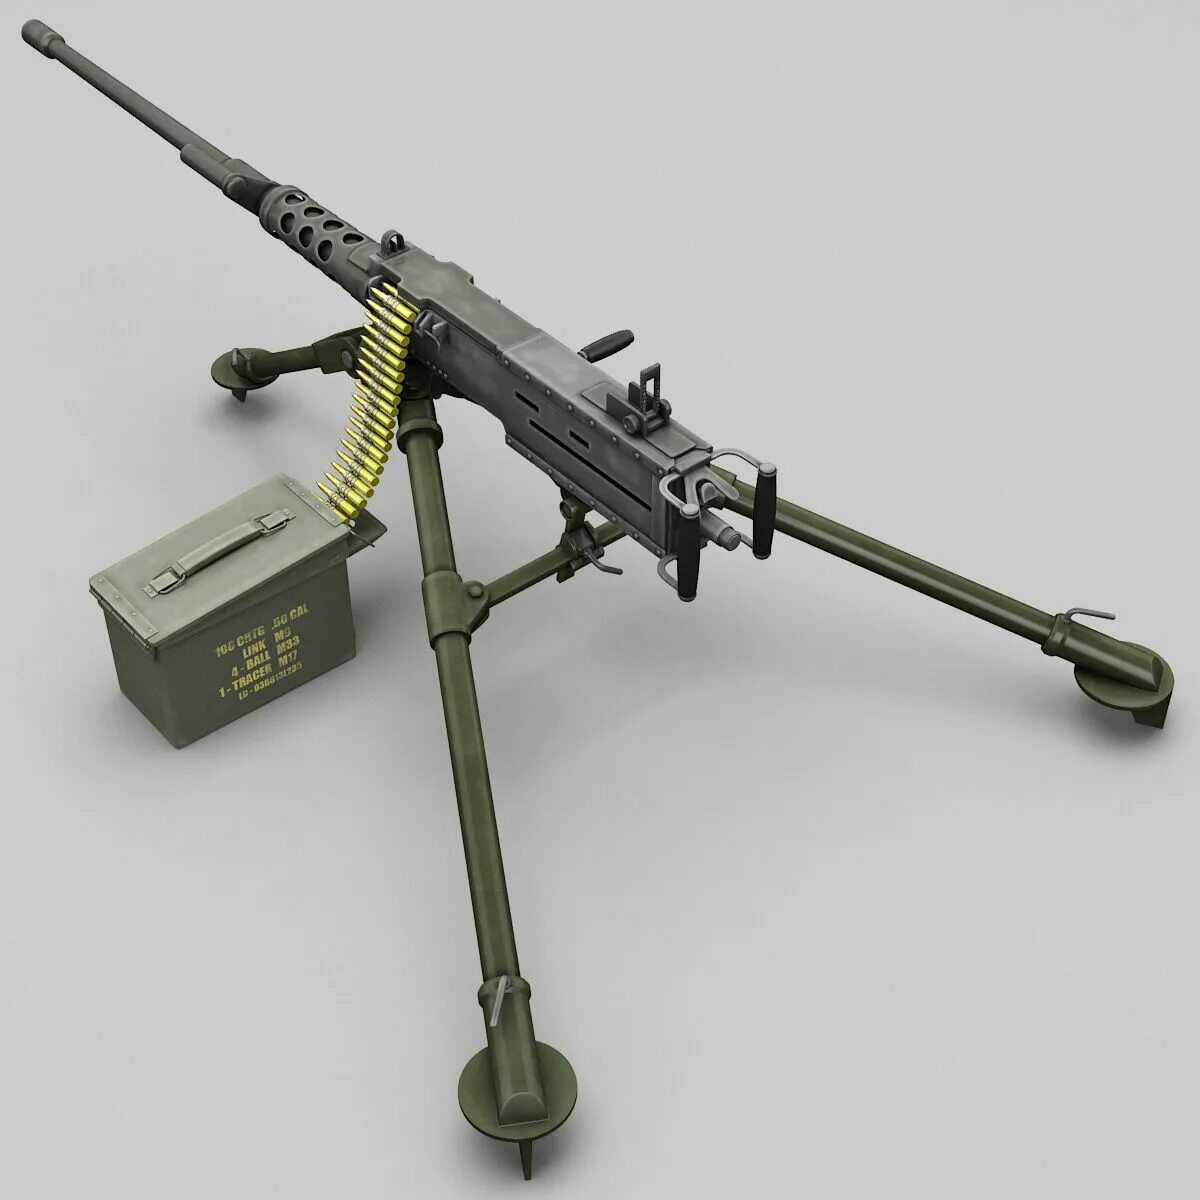 50 browning. M2hb Browning. Пулемёт Browning m2. 12,7-Мм пулеметы Browning m2. M2 Browning калибра 50.